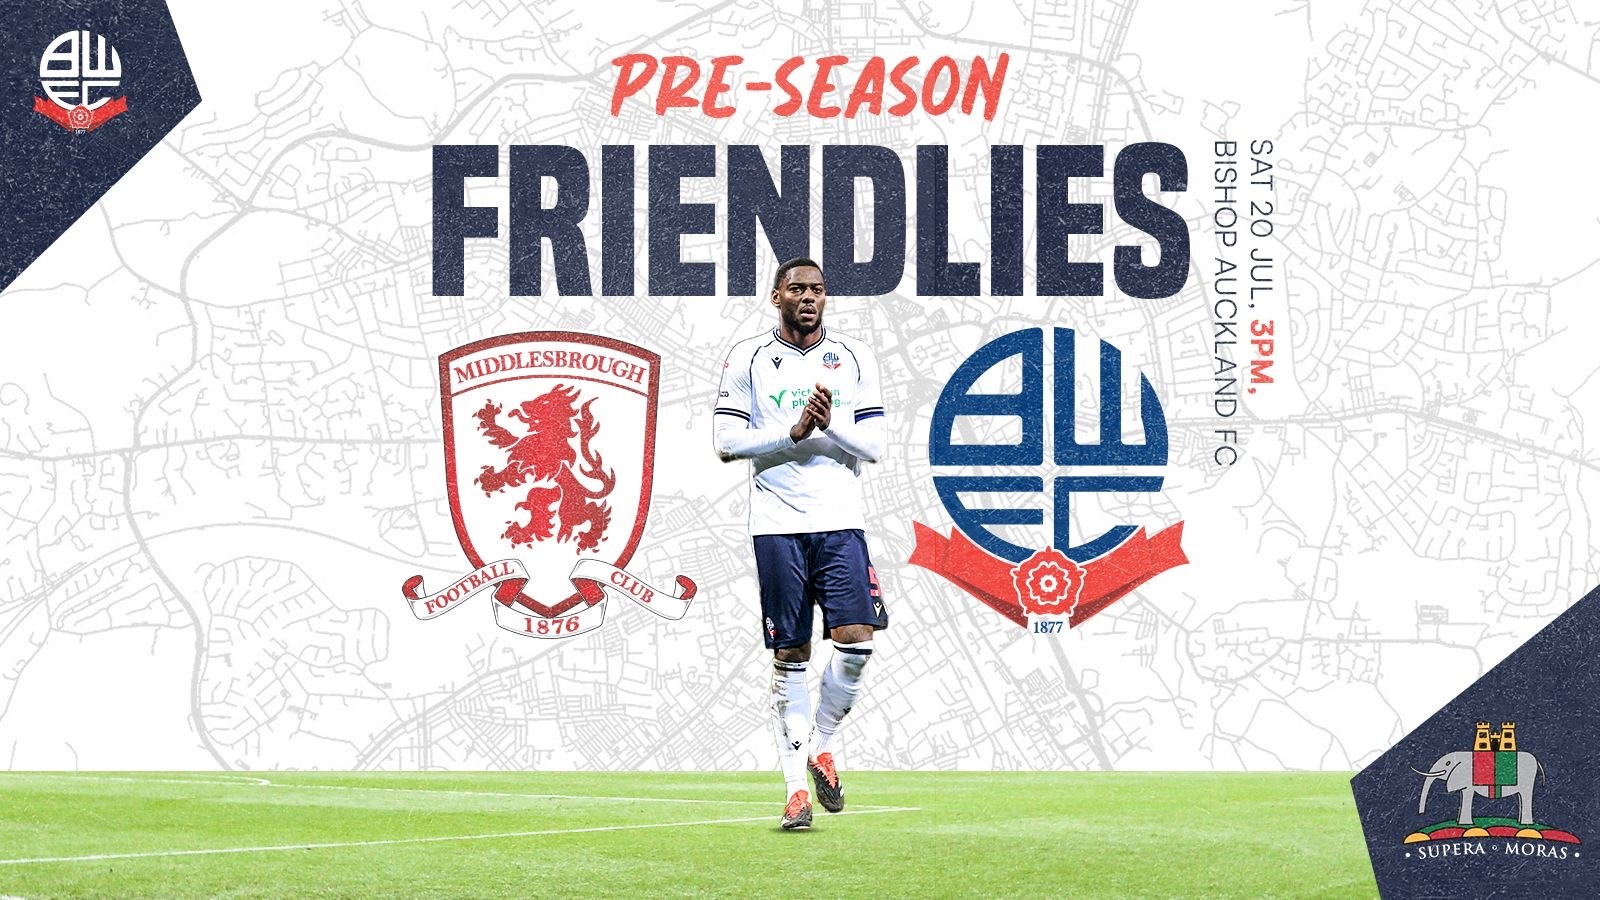 Middlesbrough friendly graphic